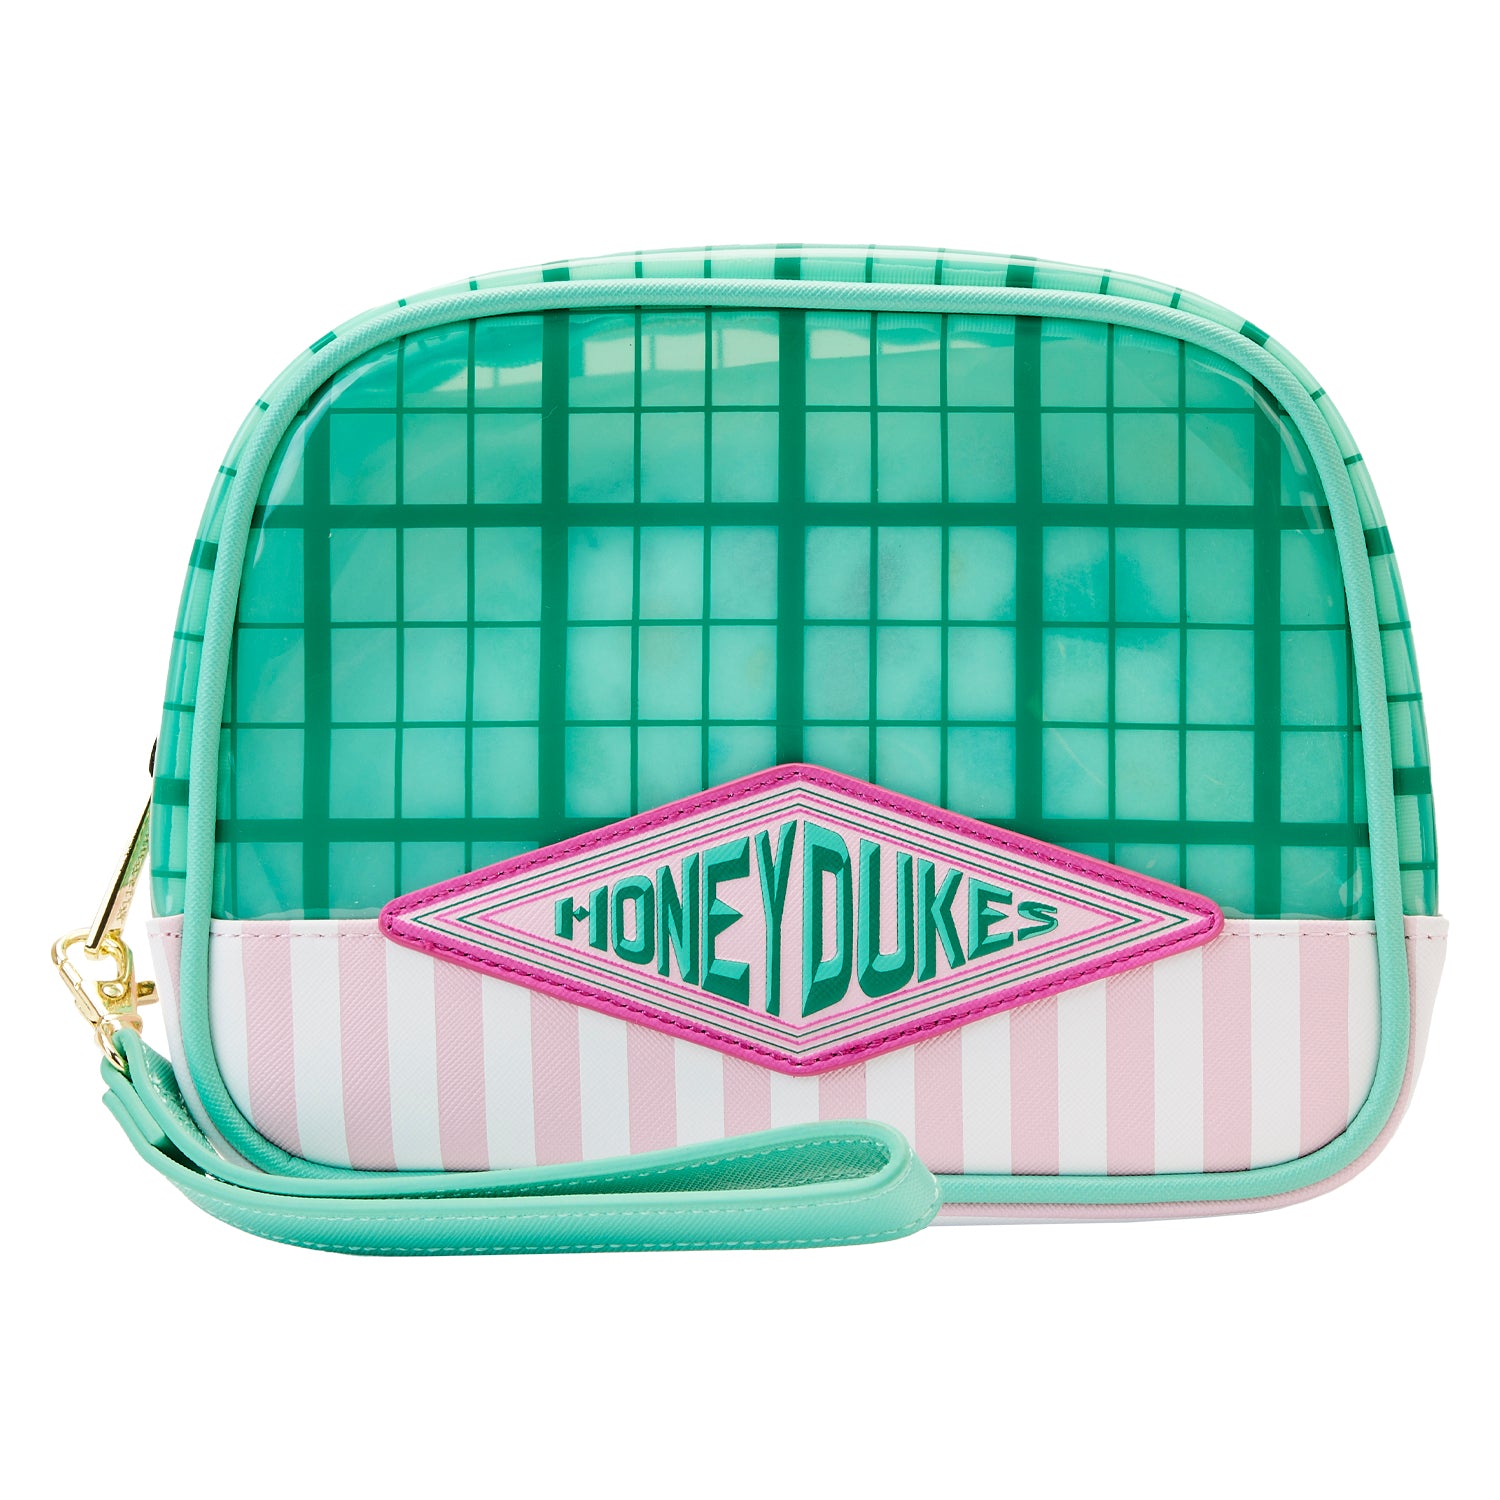 Loungefly Honeydukes Travel Cosmetic Bags Set, 2 Pieces (One Size, Pink Multi)